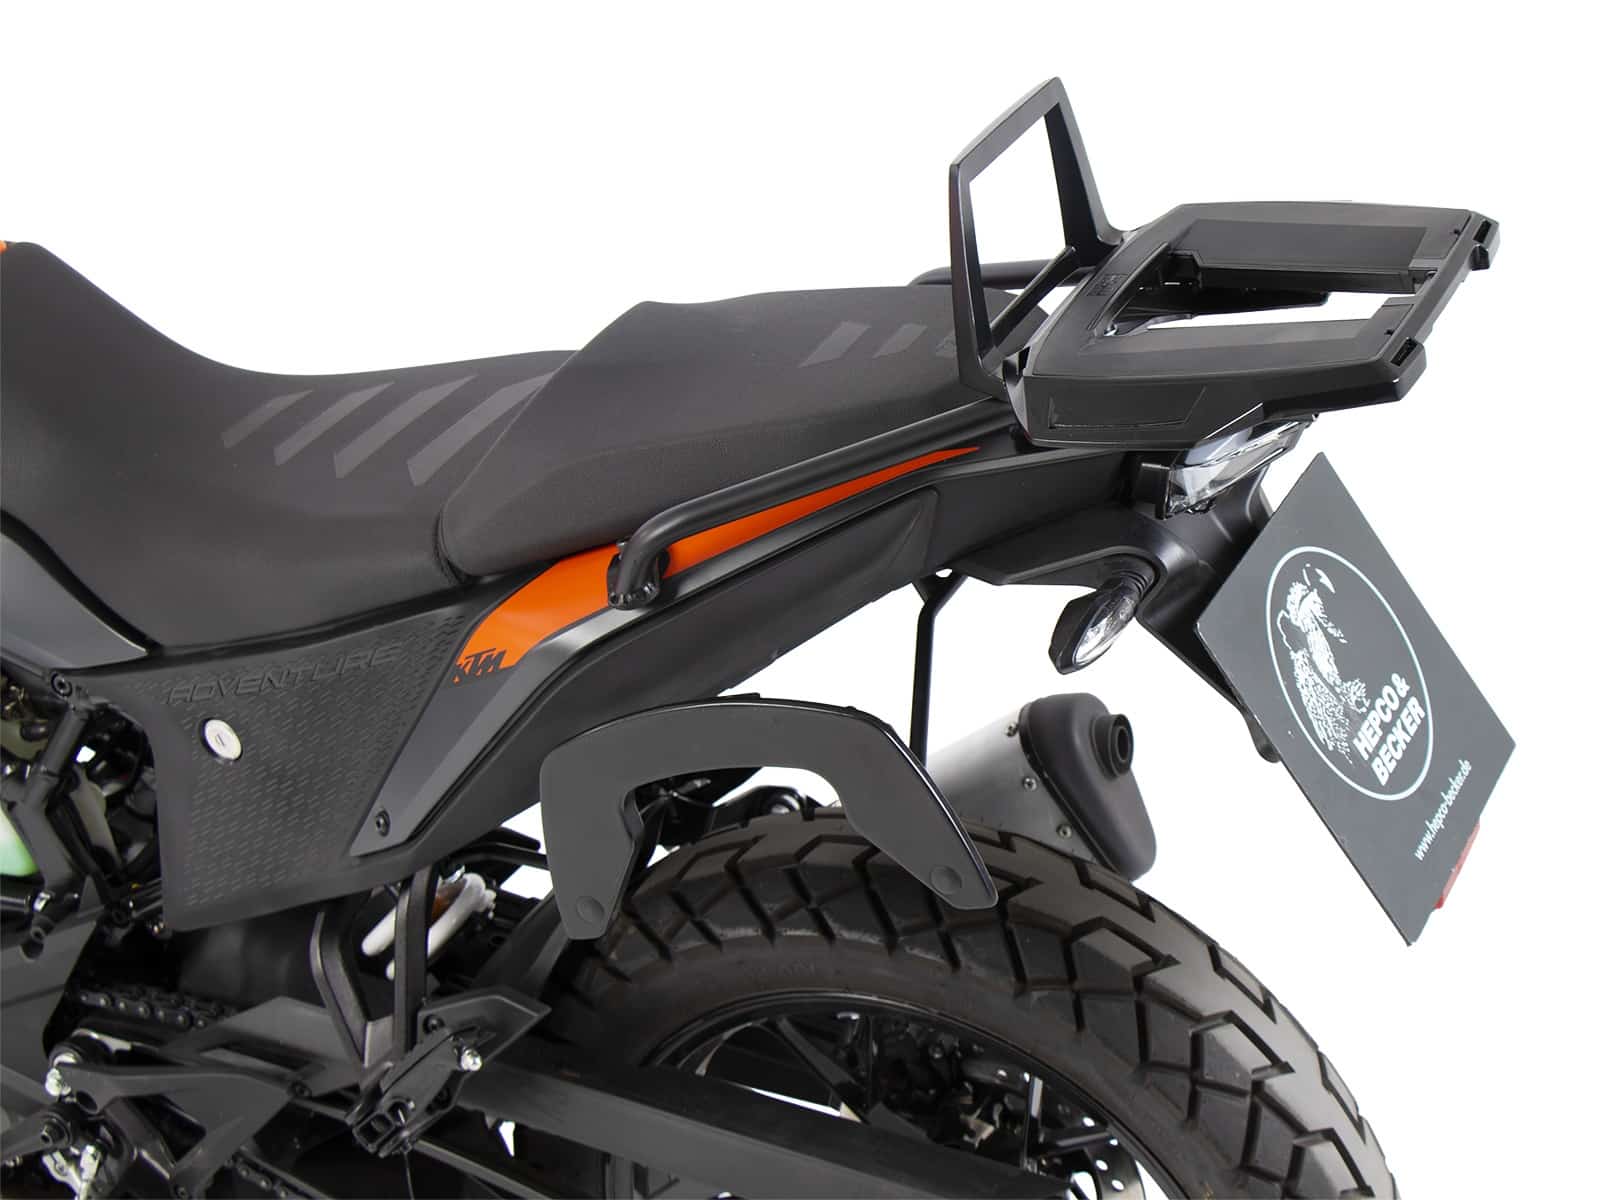 C-Bow sidecarrier for KTM 390 Adventure (2020-)